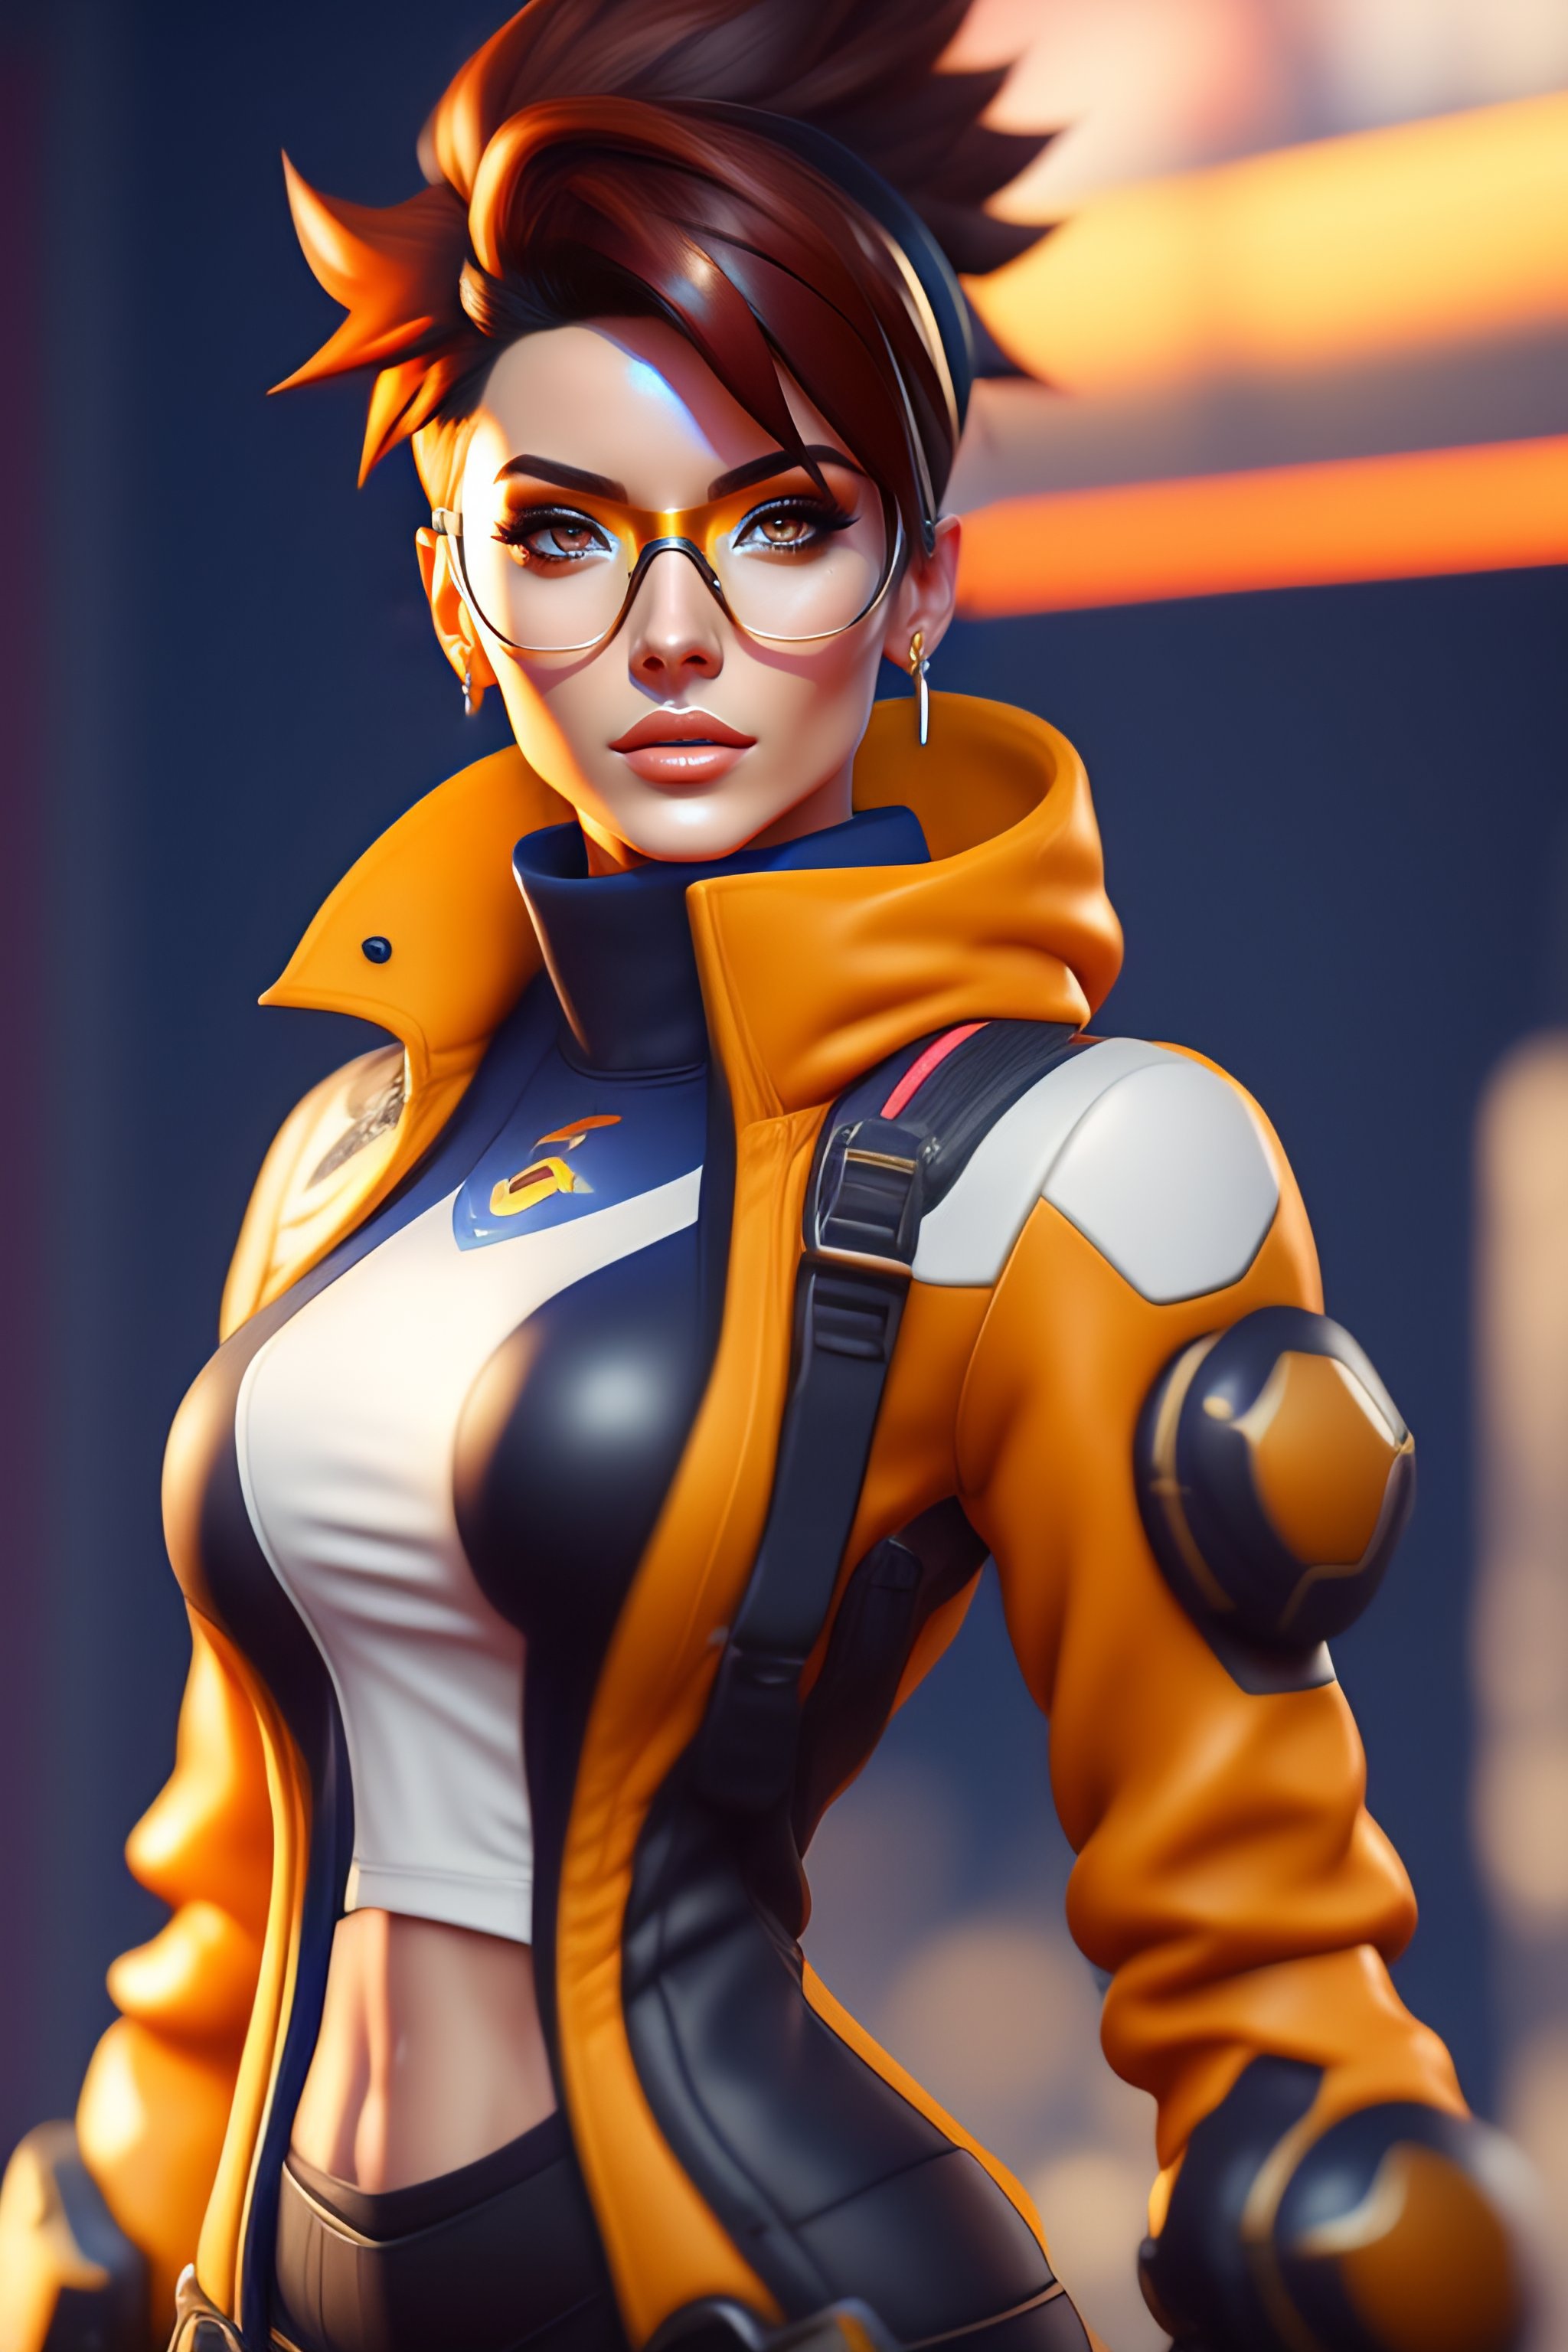 Lexica - Tracer from overwatch, highly detailed, otrn clothes